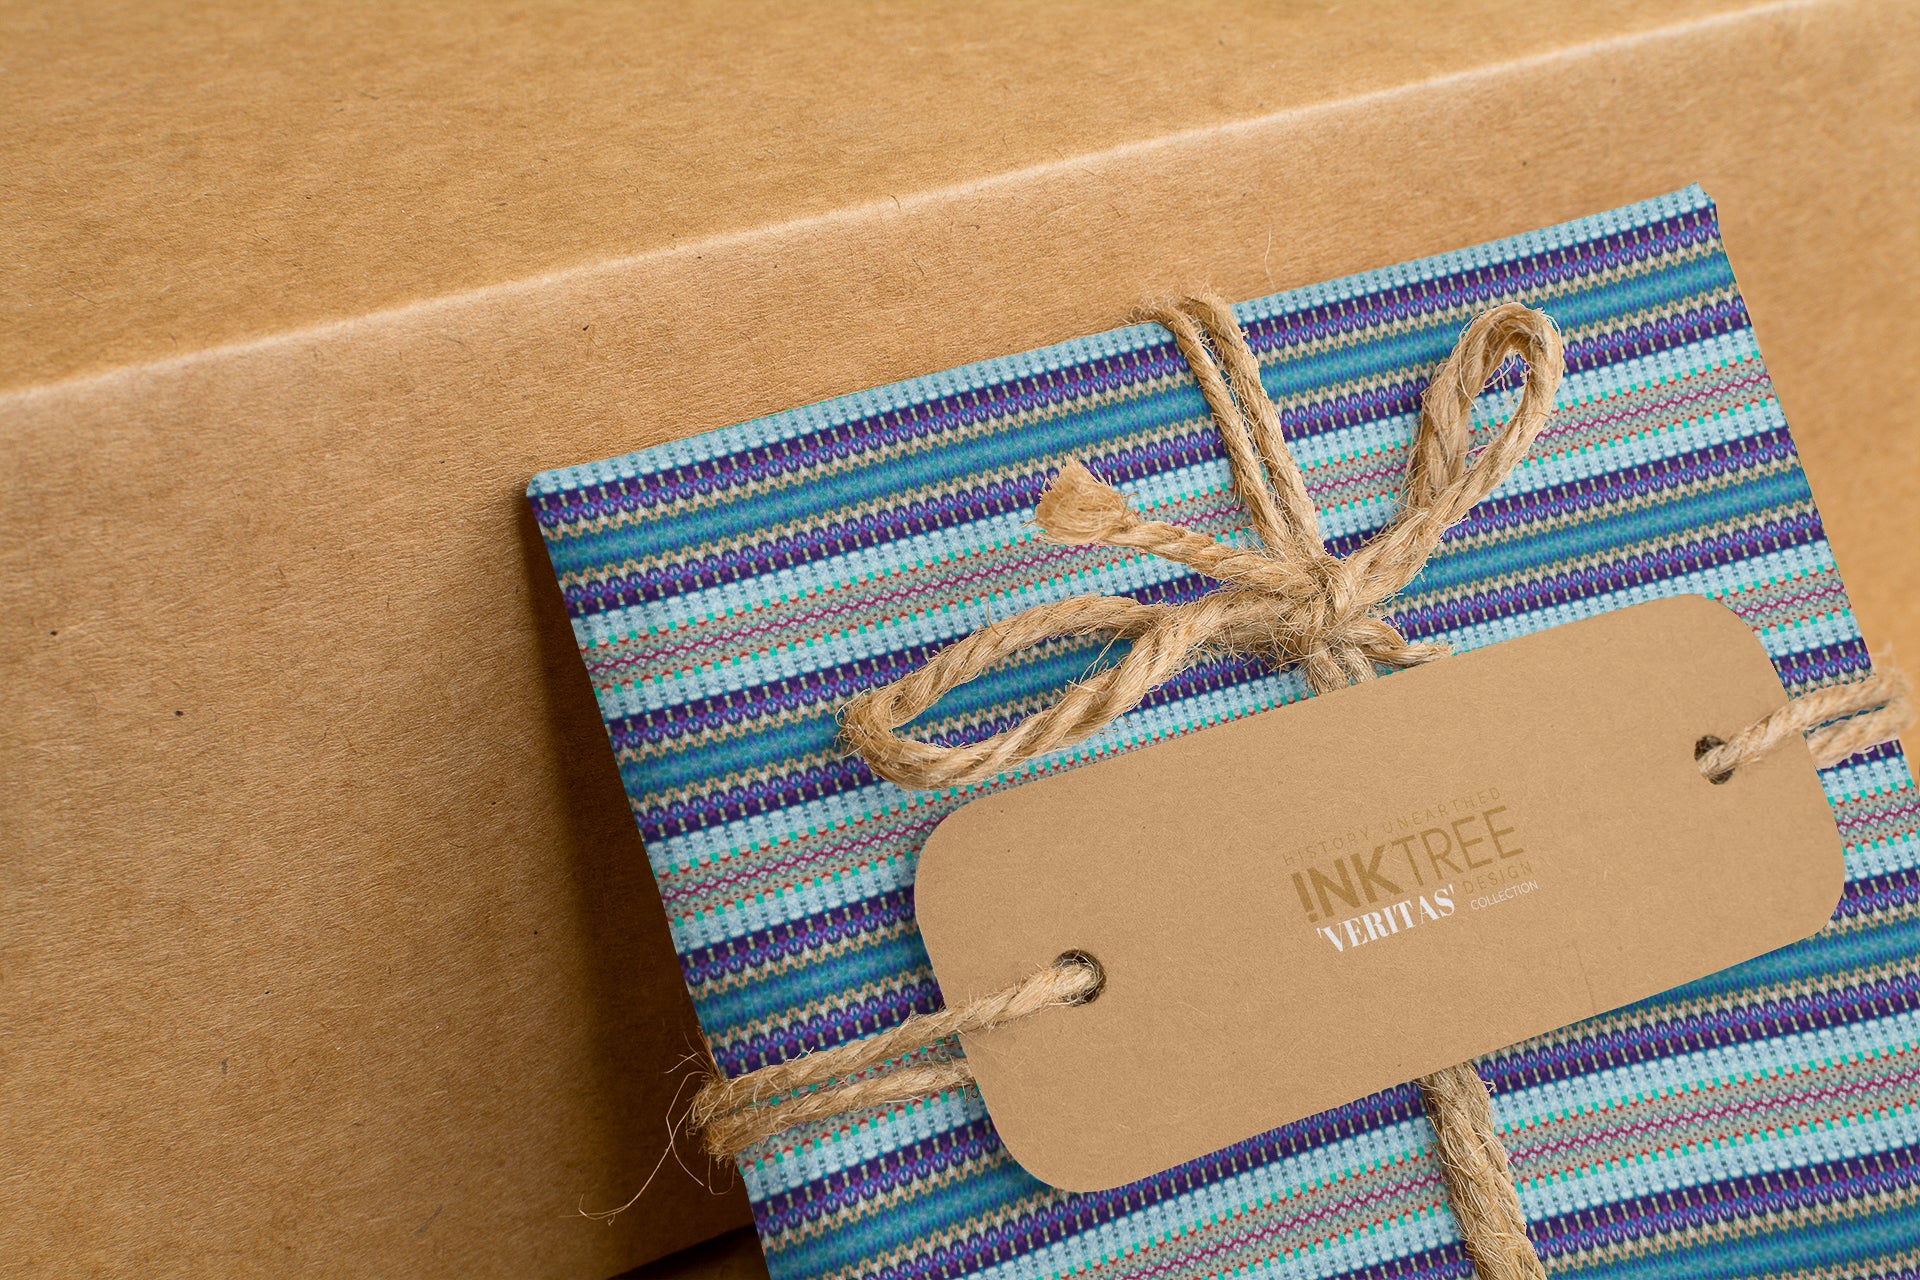 A wrapped present with brown paper in the background.  Tied with brown twine and brown tag, with blue, purple and green horizontal pattern.